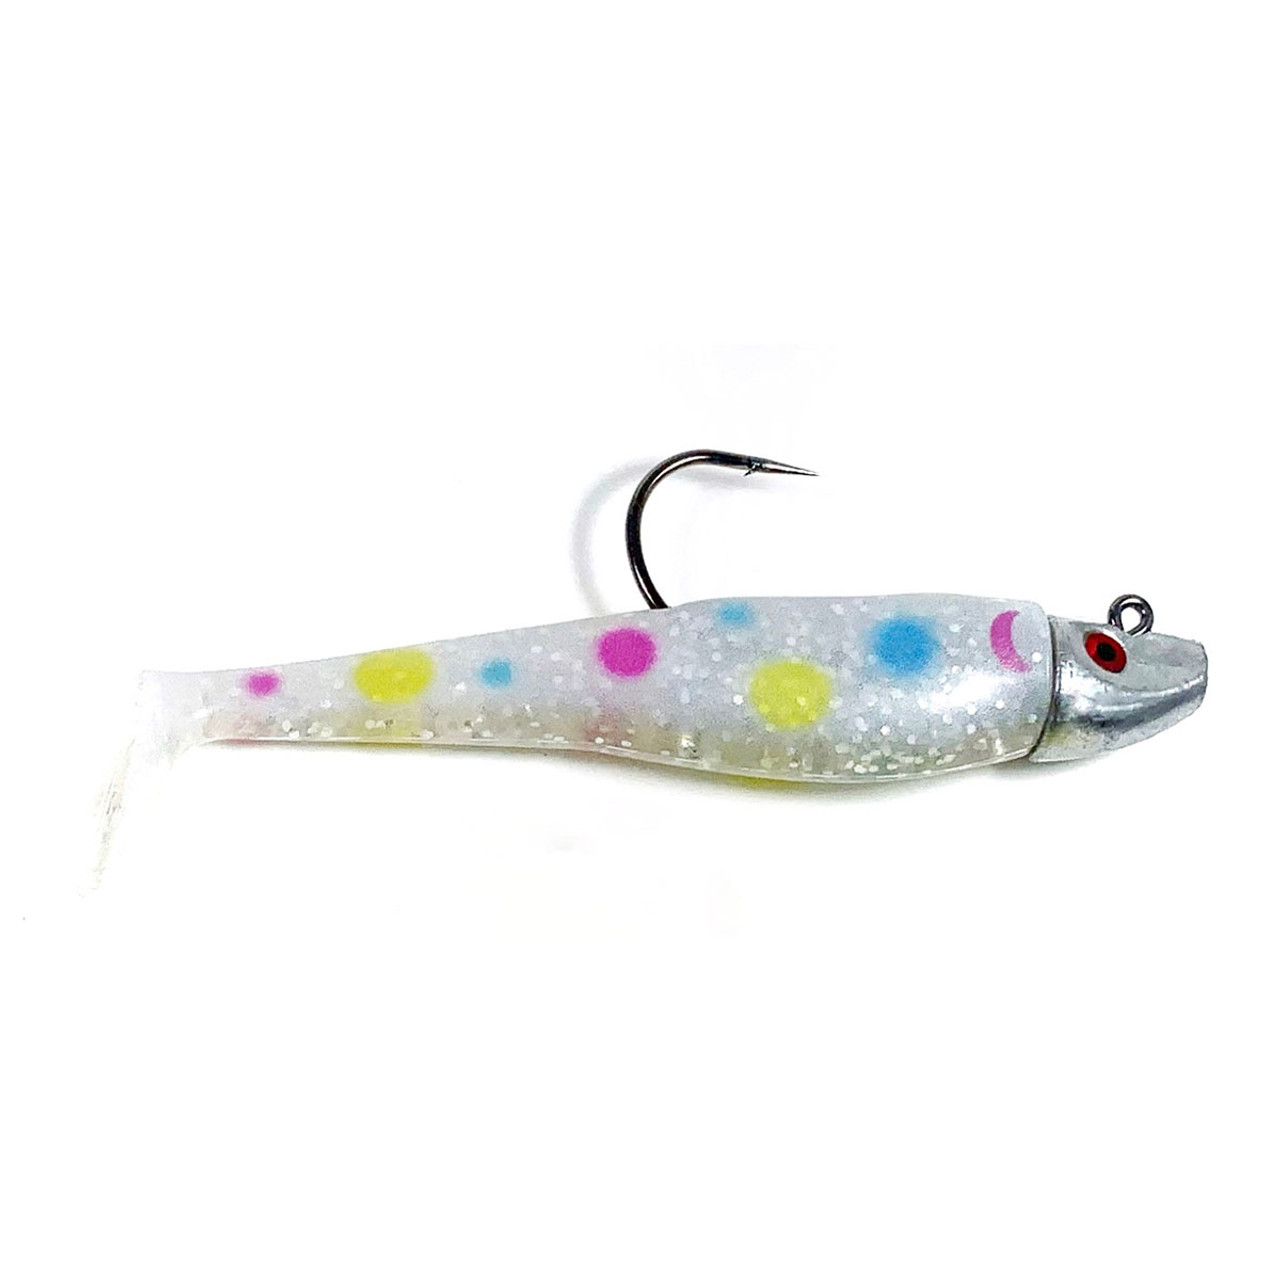 Al Gag's Whip it Fish 3oz 6”. Used primarily for Striped Bass